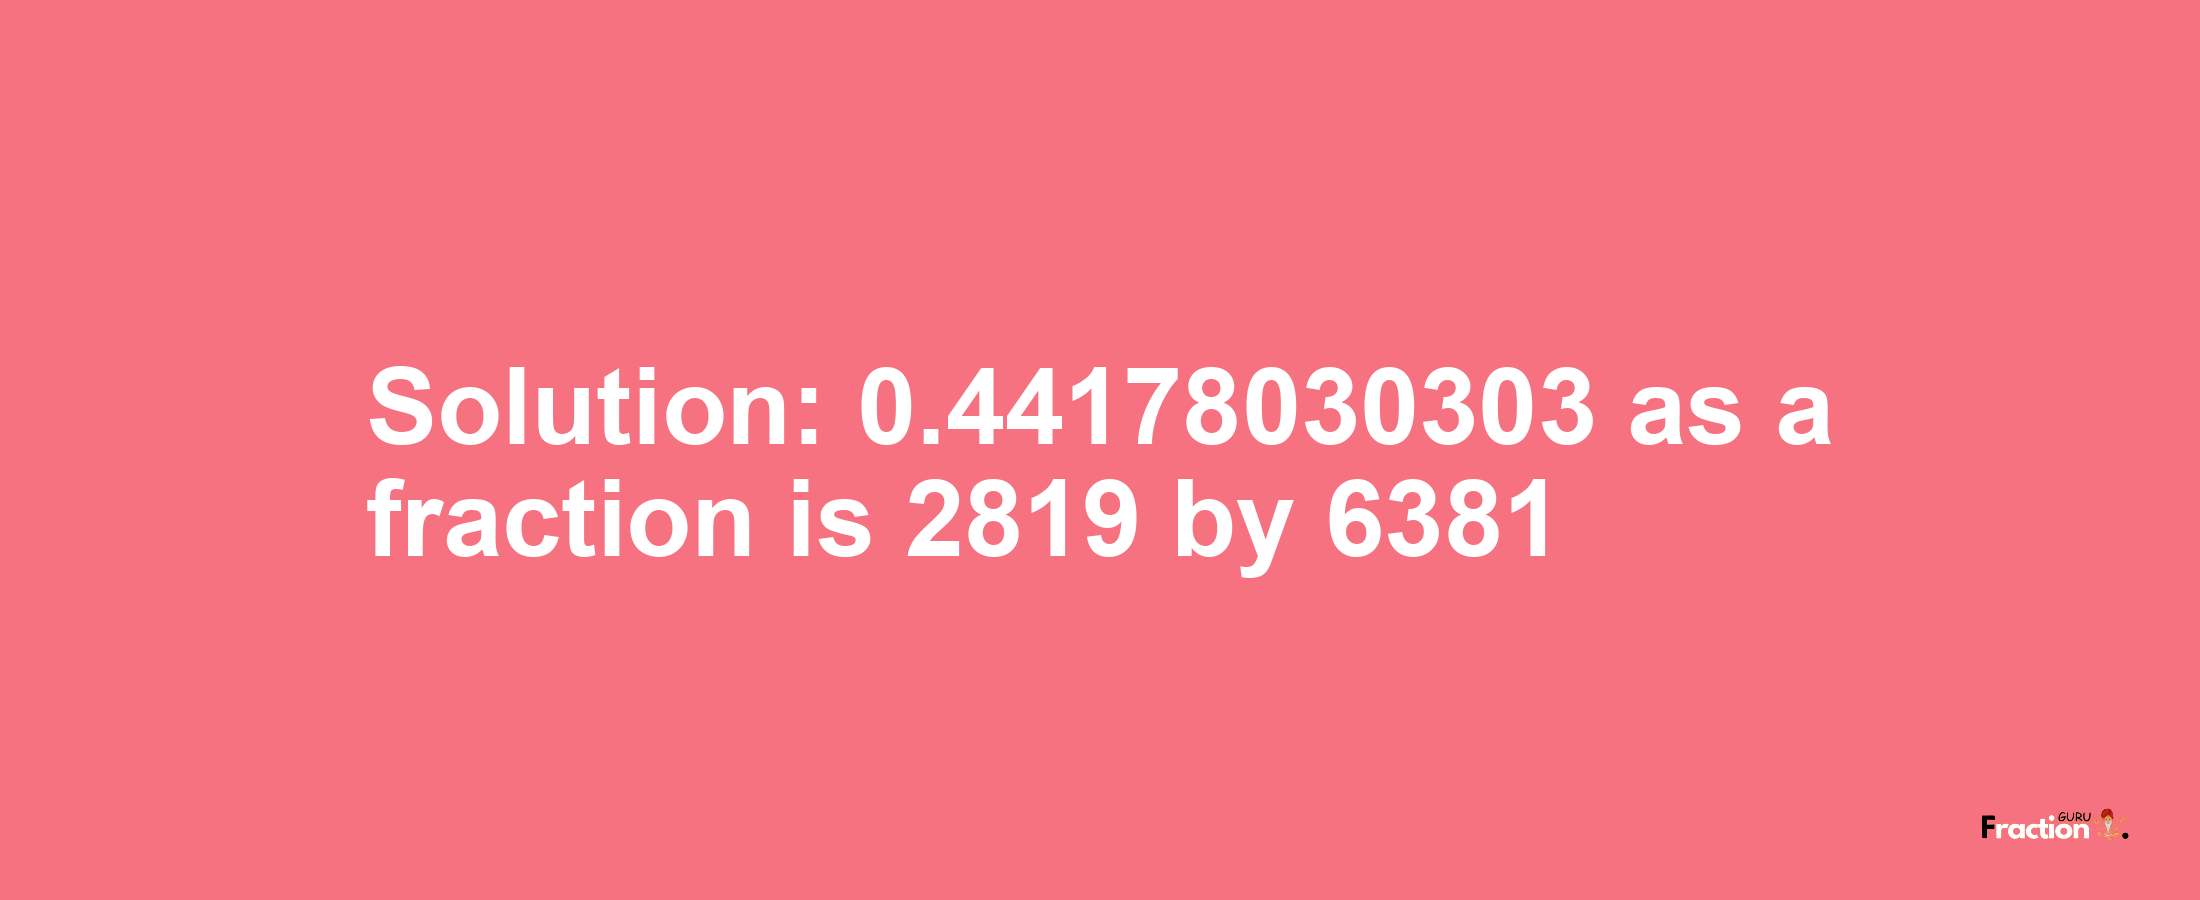 Solution:0.44178030303 as a fraction is 2819/6381